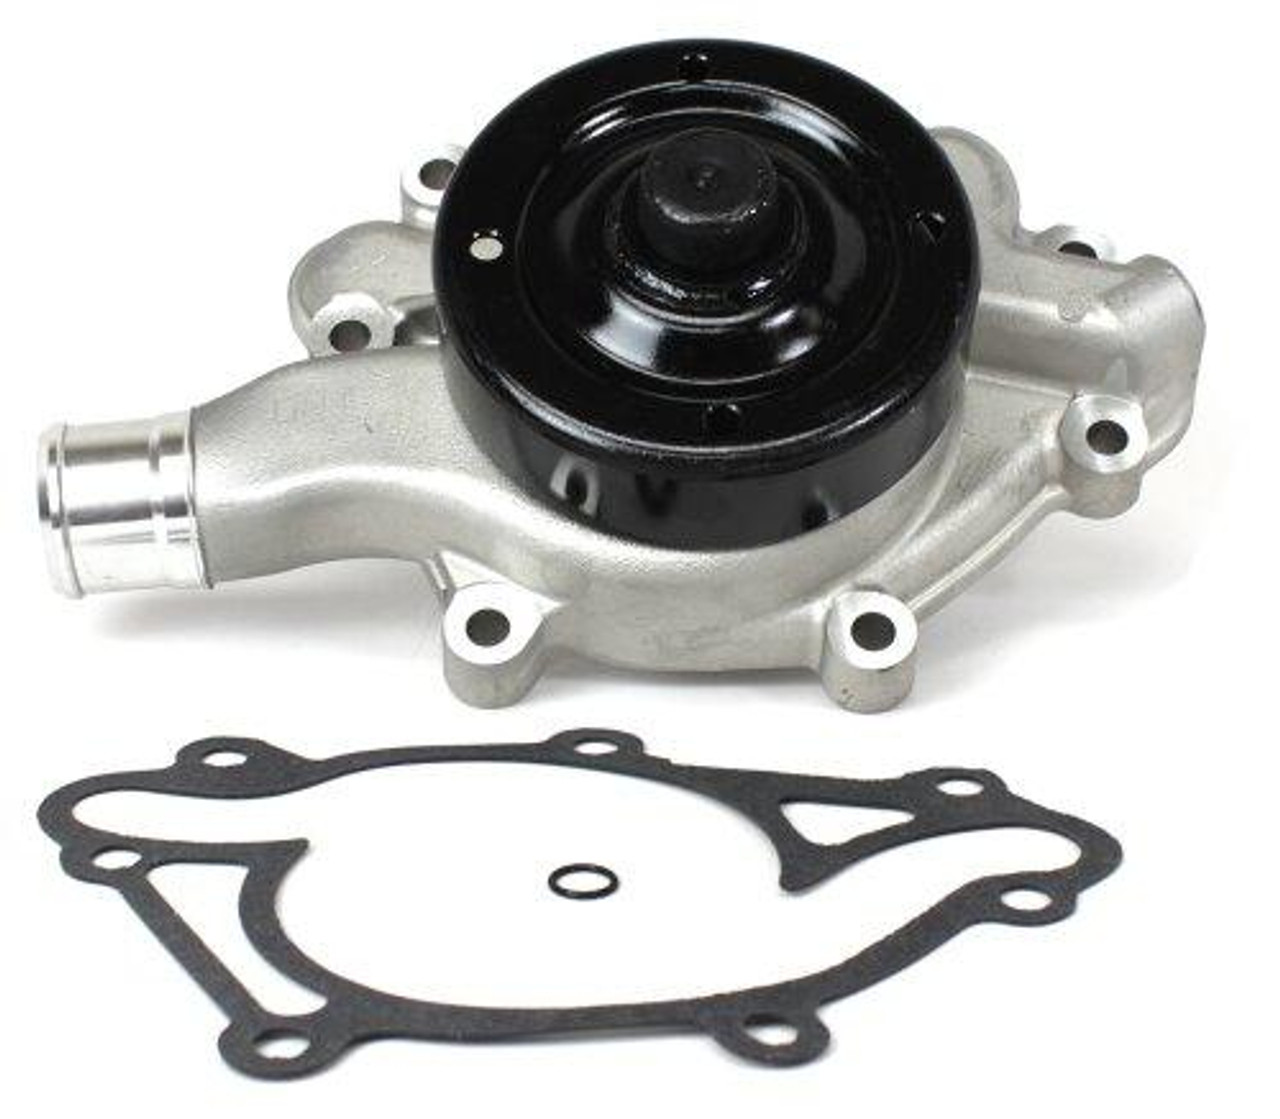 Water Pump - 1994 Jeep Grand Cherokee 5.2L Engine Parts # WP1130ZE175